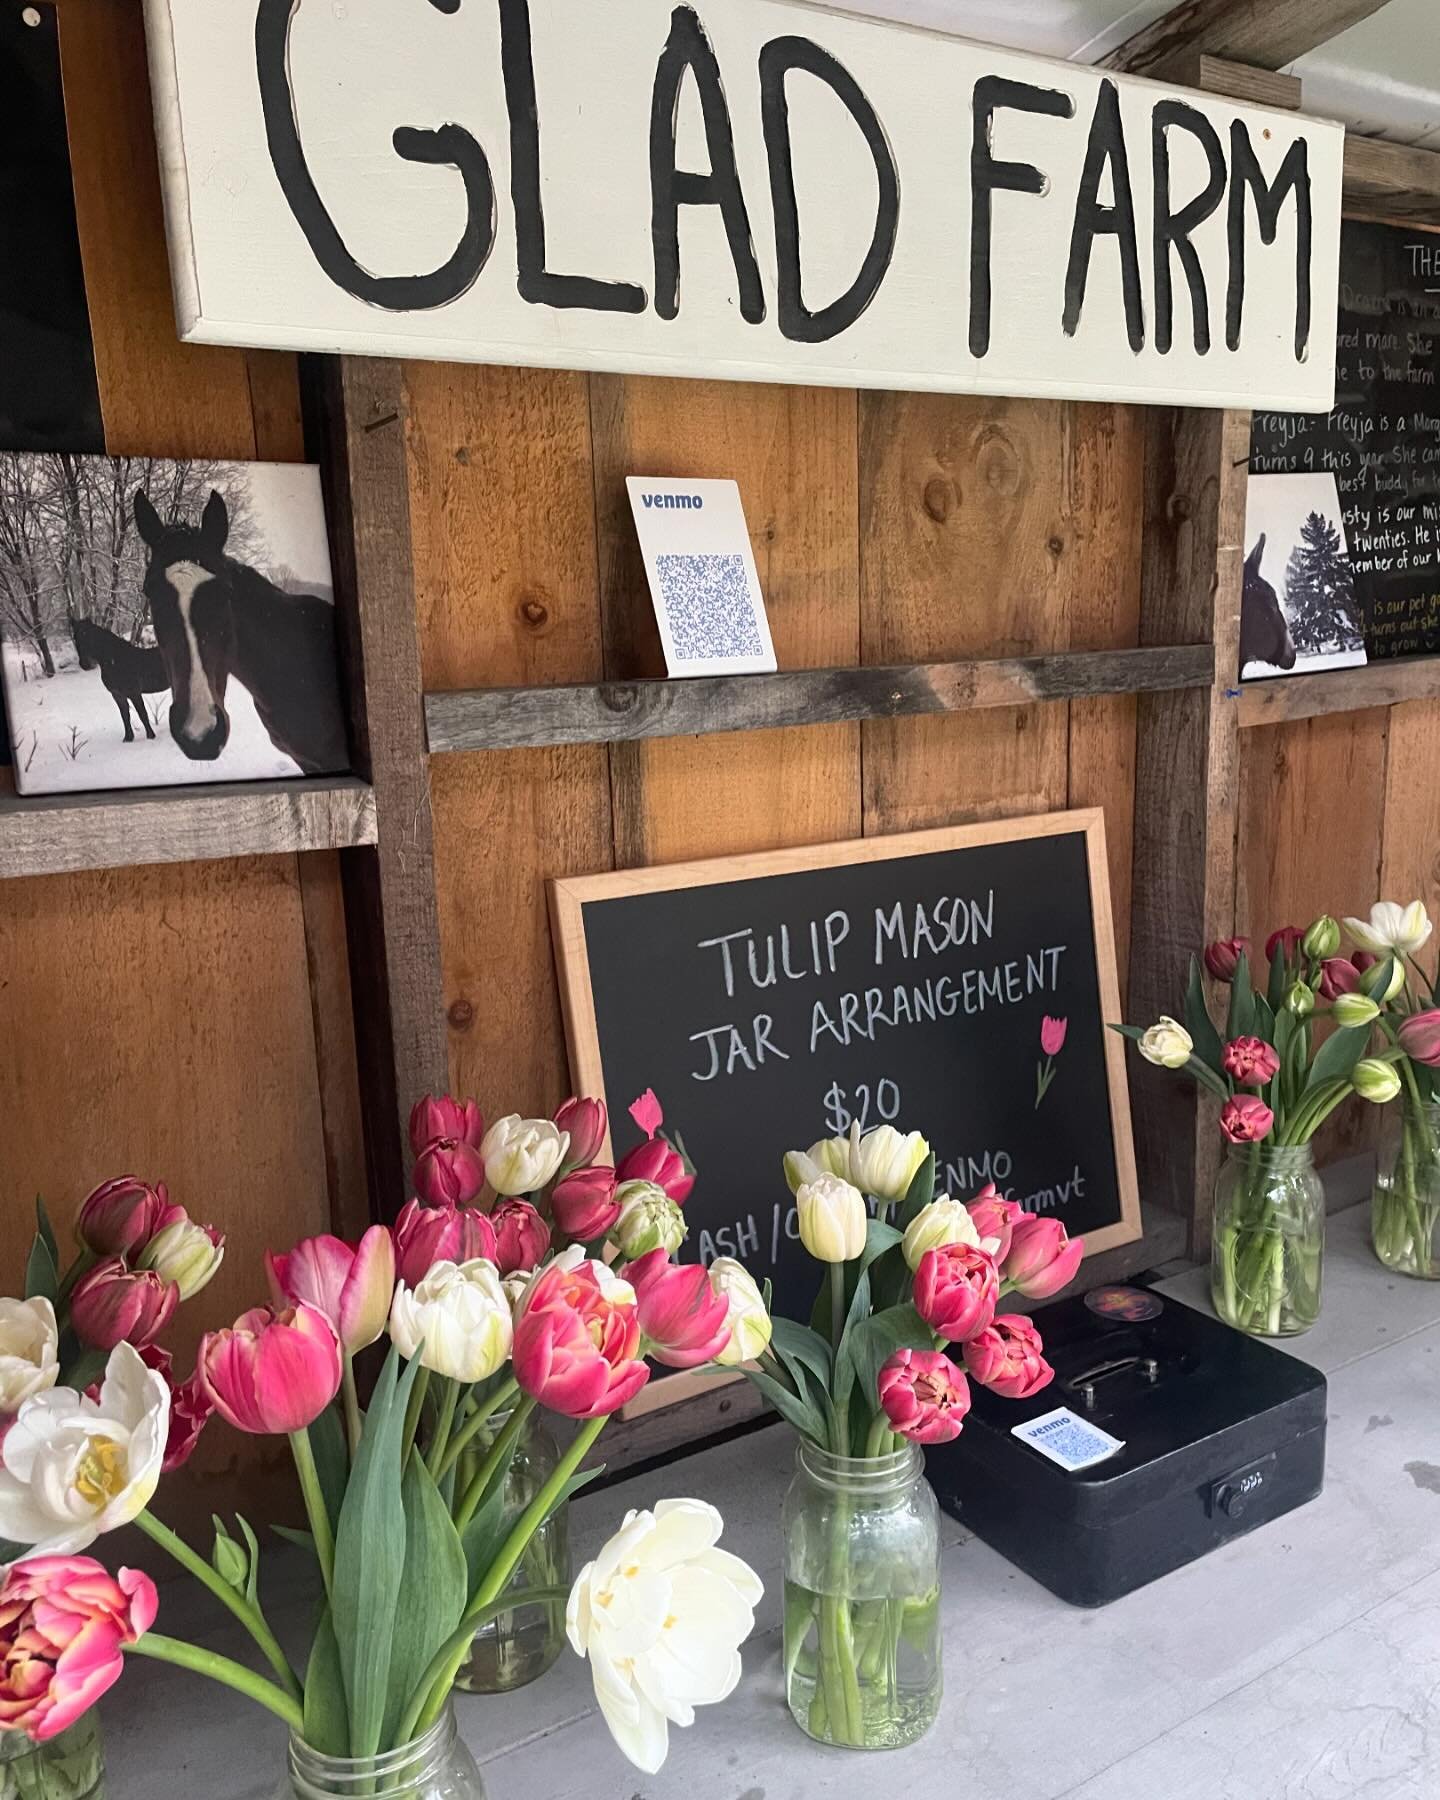 Need flowers for the special moms in your life? Our flower stand will be stocked Friday- Sunday with fresh flowers. Want something a bit bigger? Visit gladfarmvt.com to order a larger arrangement 🌷